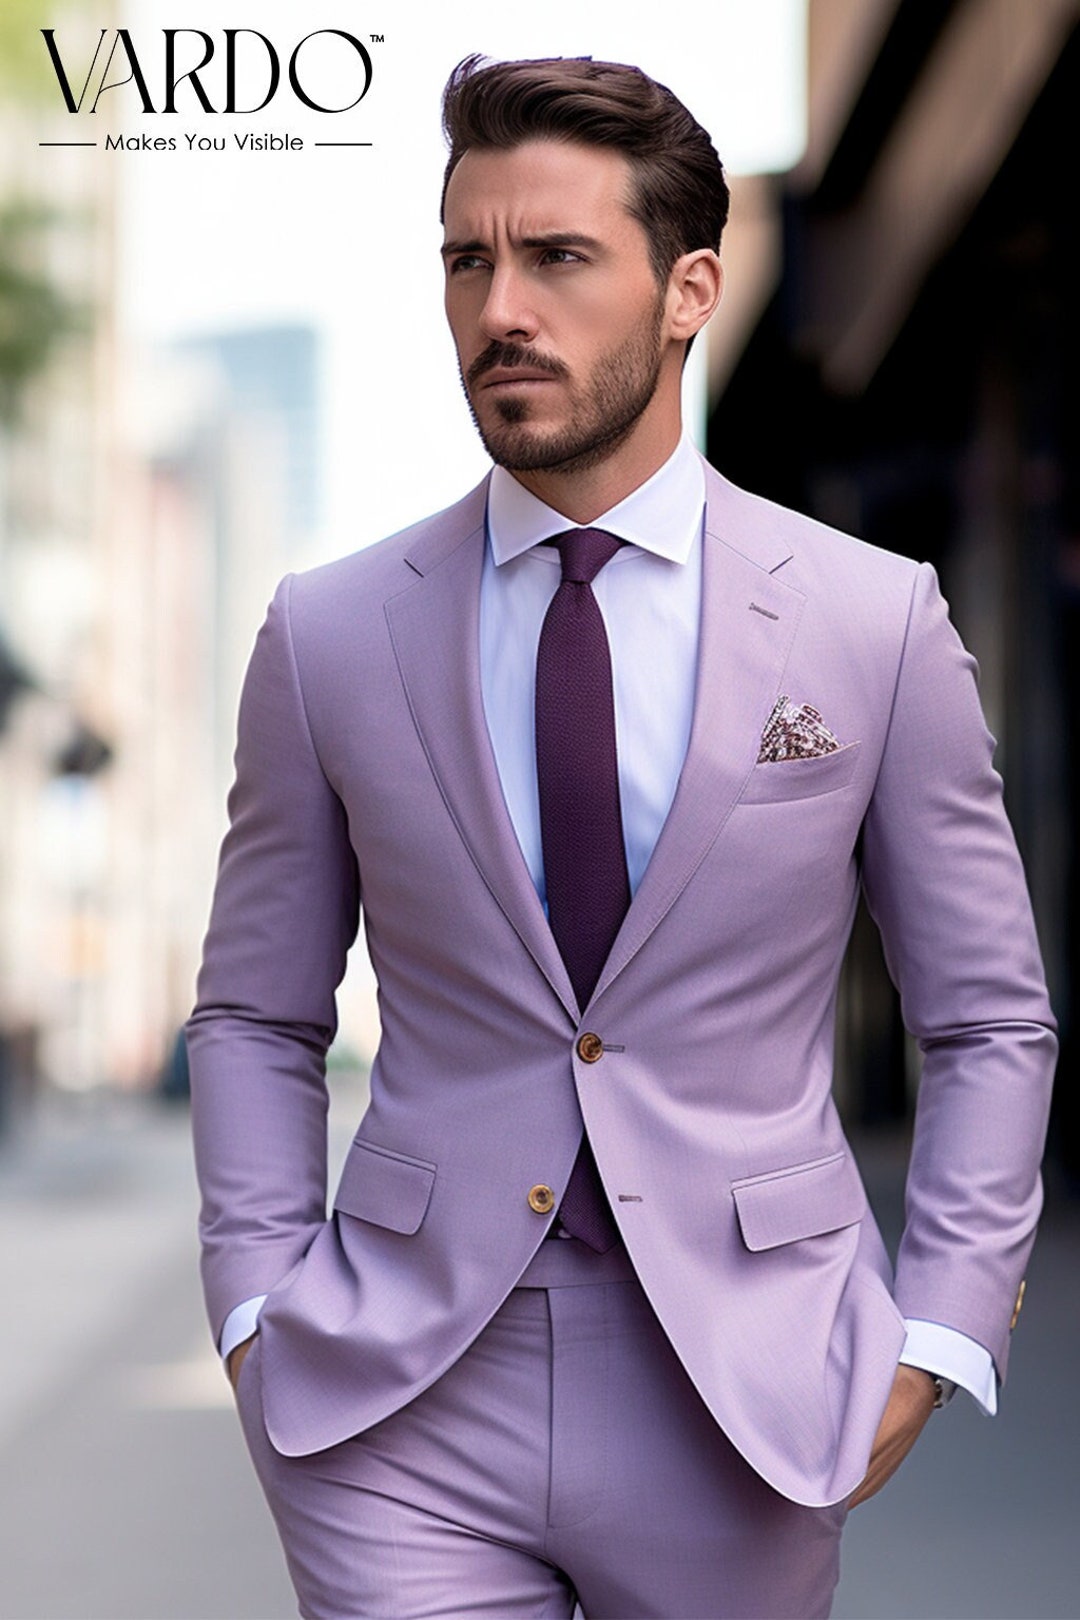 Man Purple Double Breasted Suit Premium Quality Formal Wear - Etsy